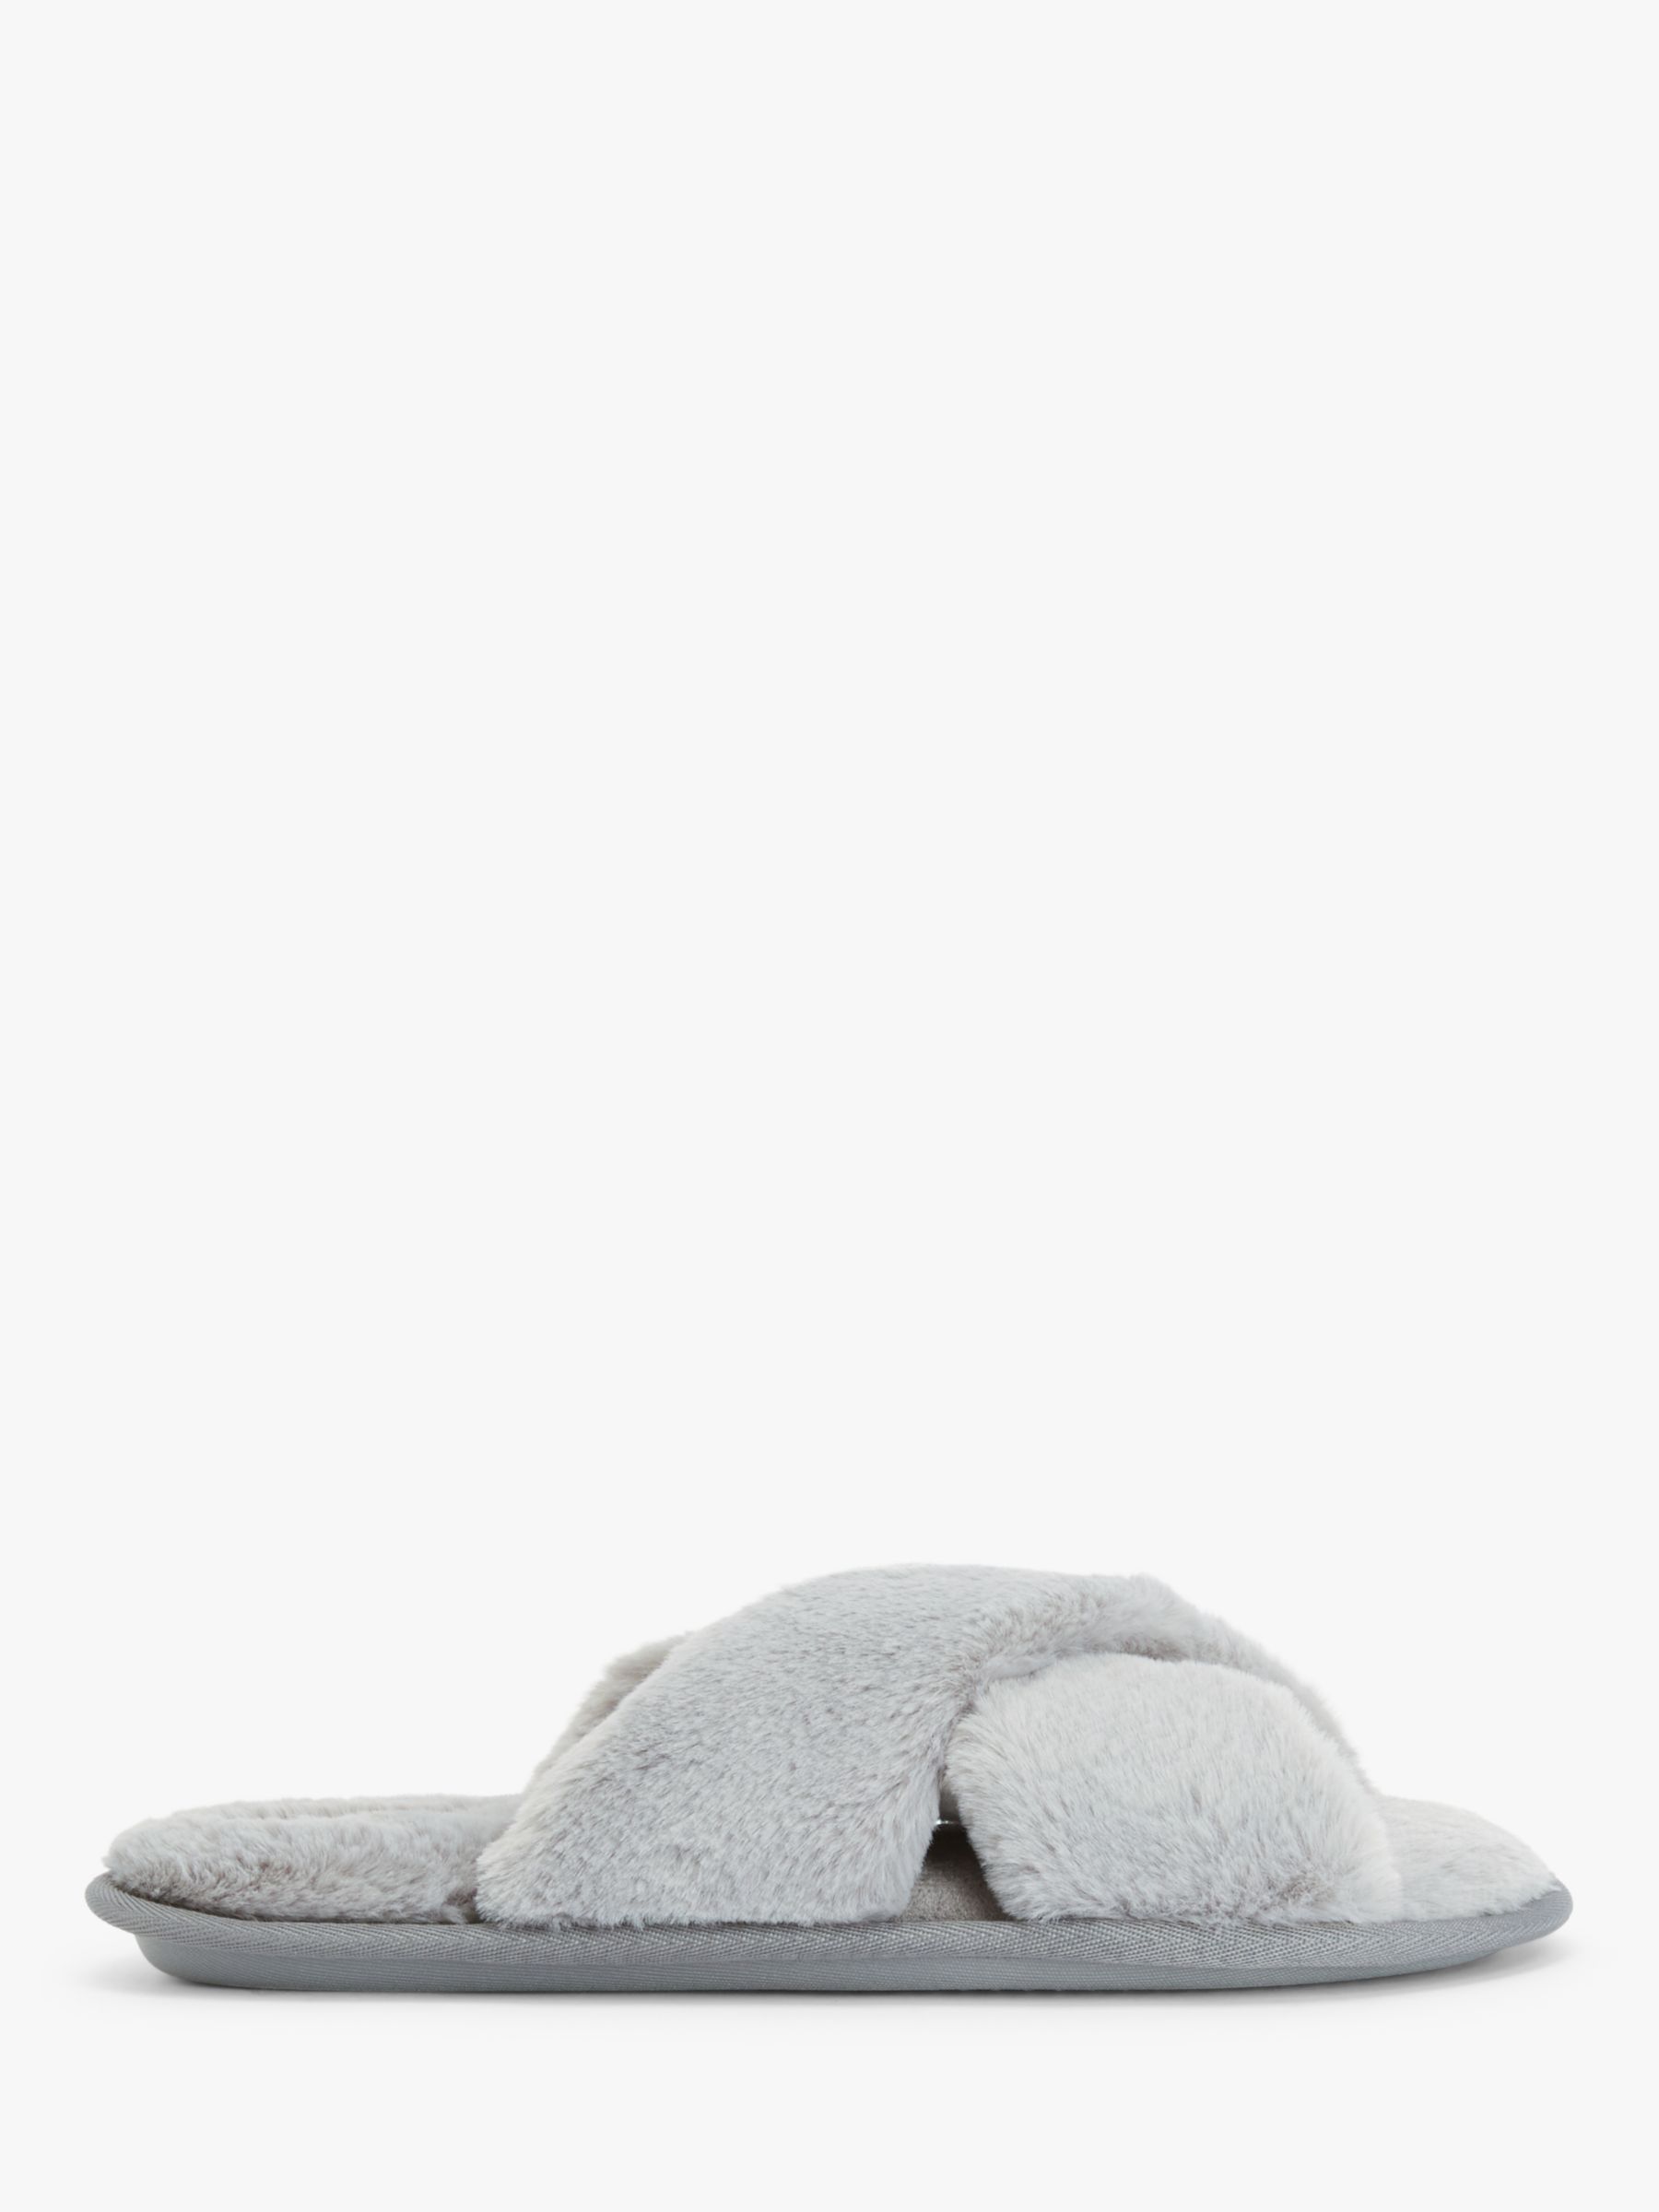 Sales of John Lewis slider slippers have doubled since lockdown